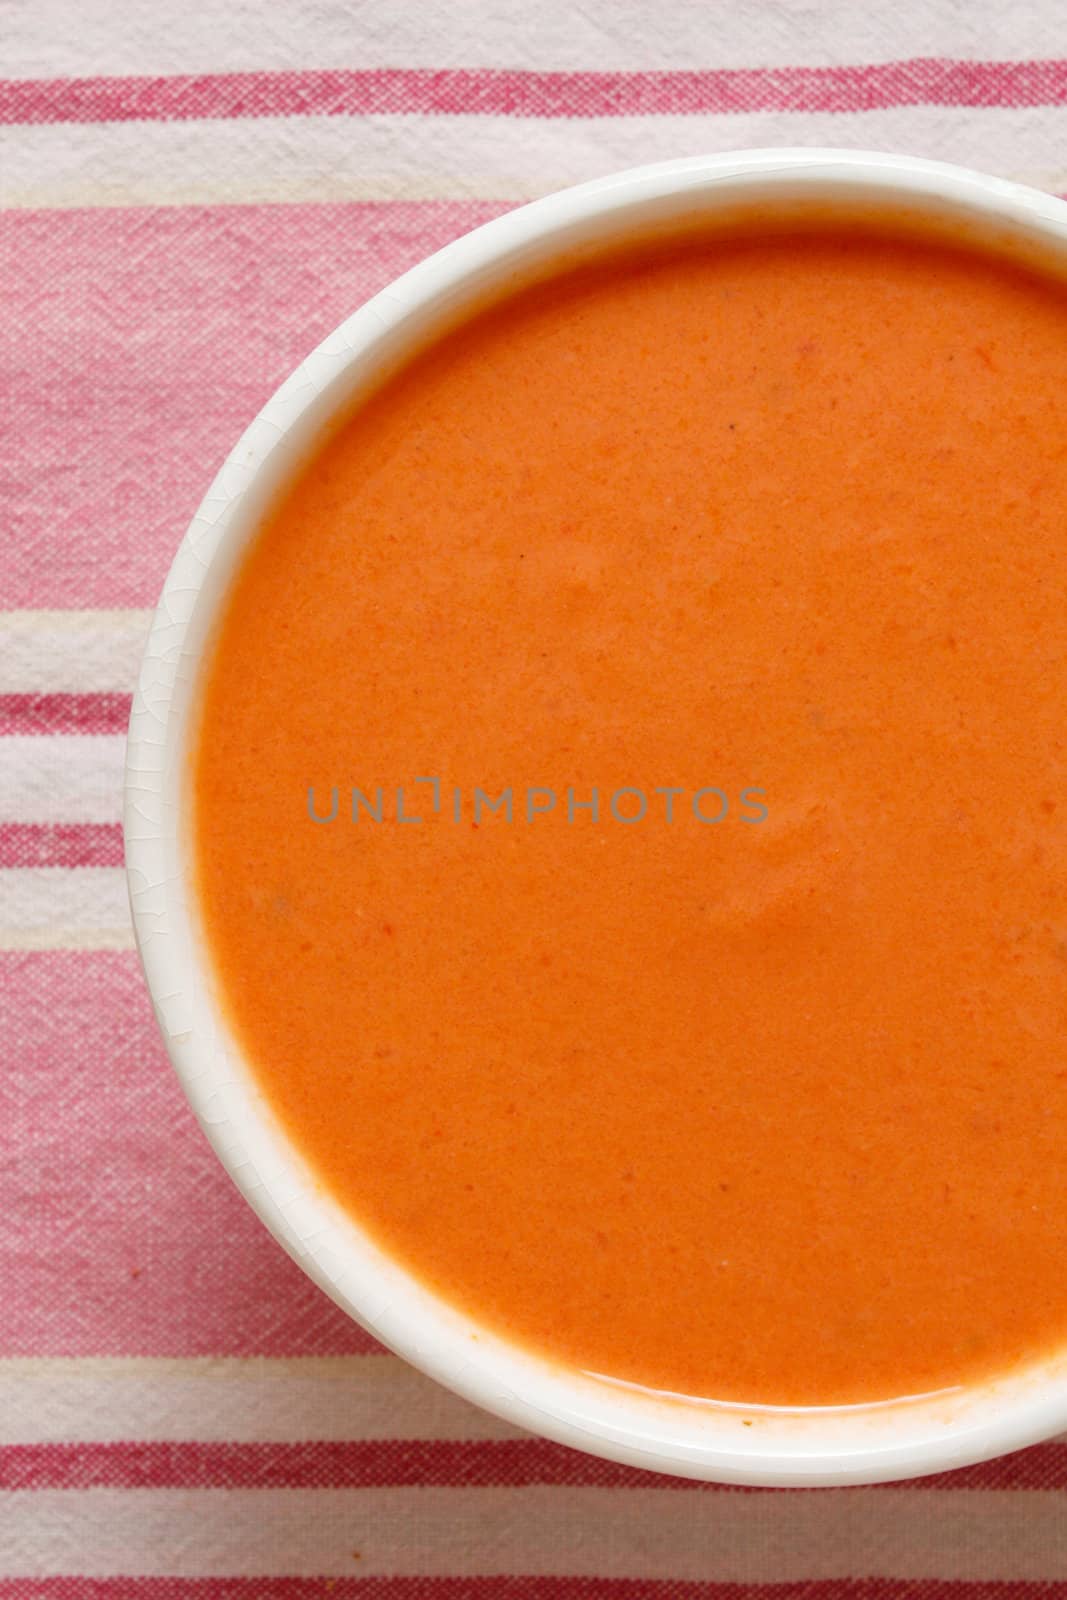 Tomato soup by leeser